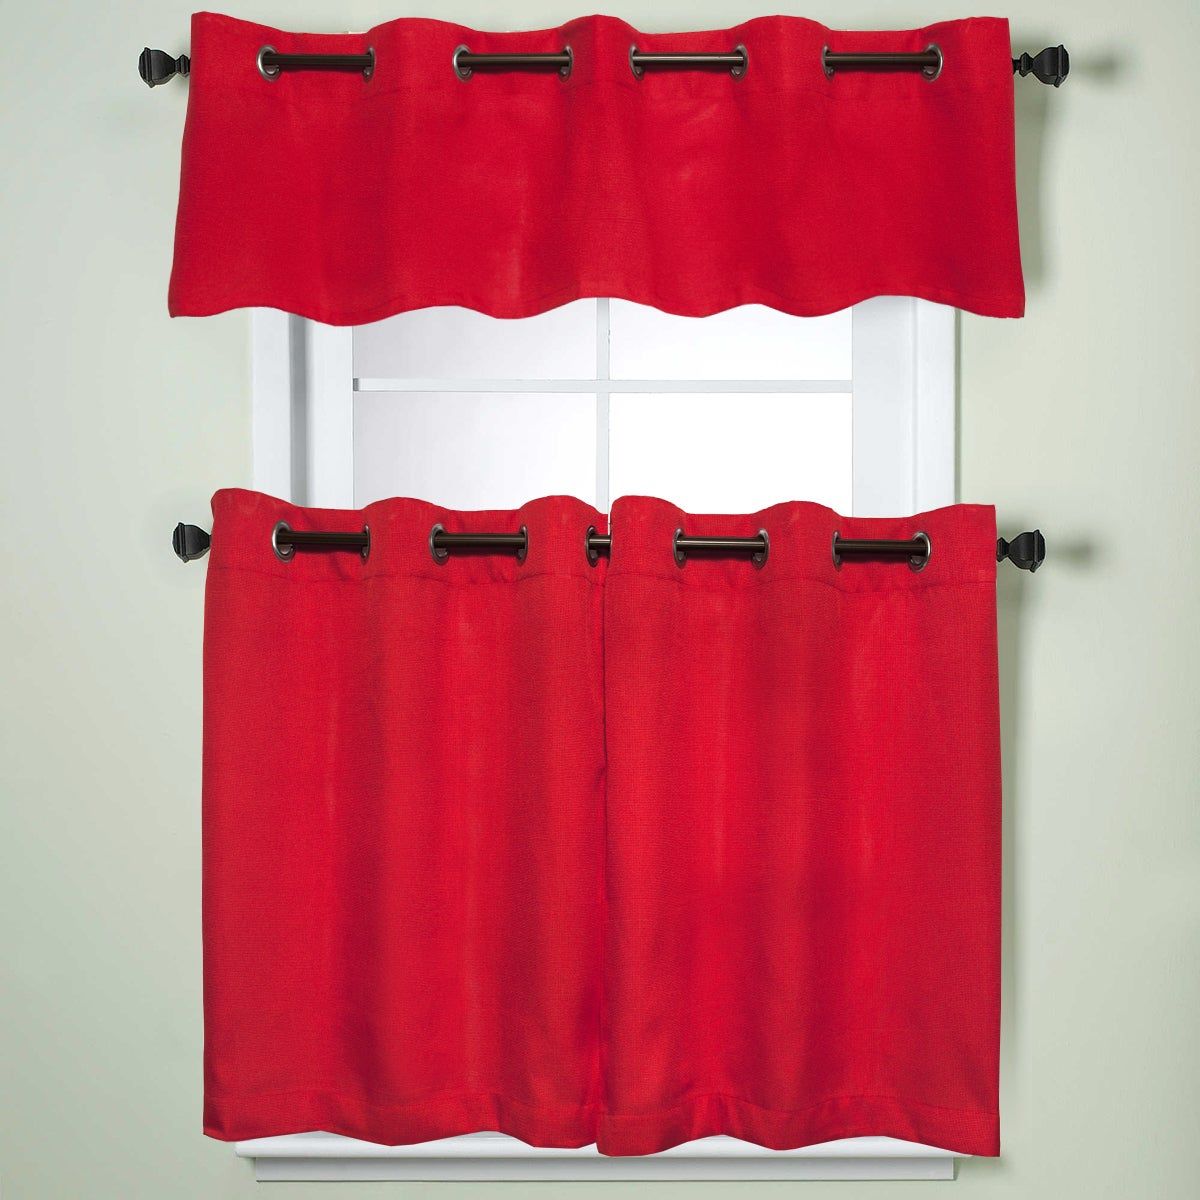 Modern Subtle Texture Solid Red Kitchen Curtain Parts With Grommets  Tier  And Valance Options Intended For Modern Subtle Texture Solid Red Kitchen Curtains (Photo 1 of 20)